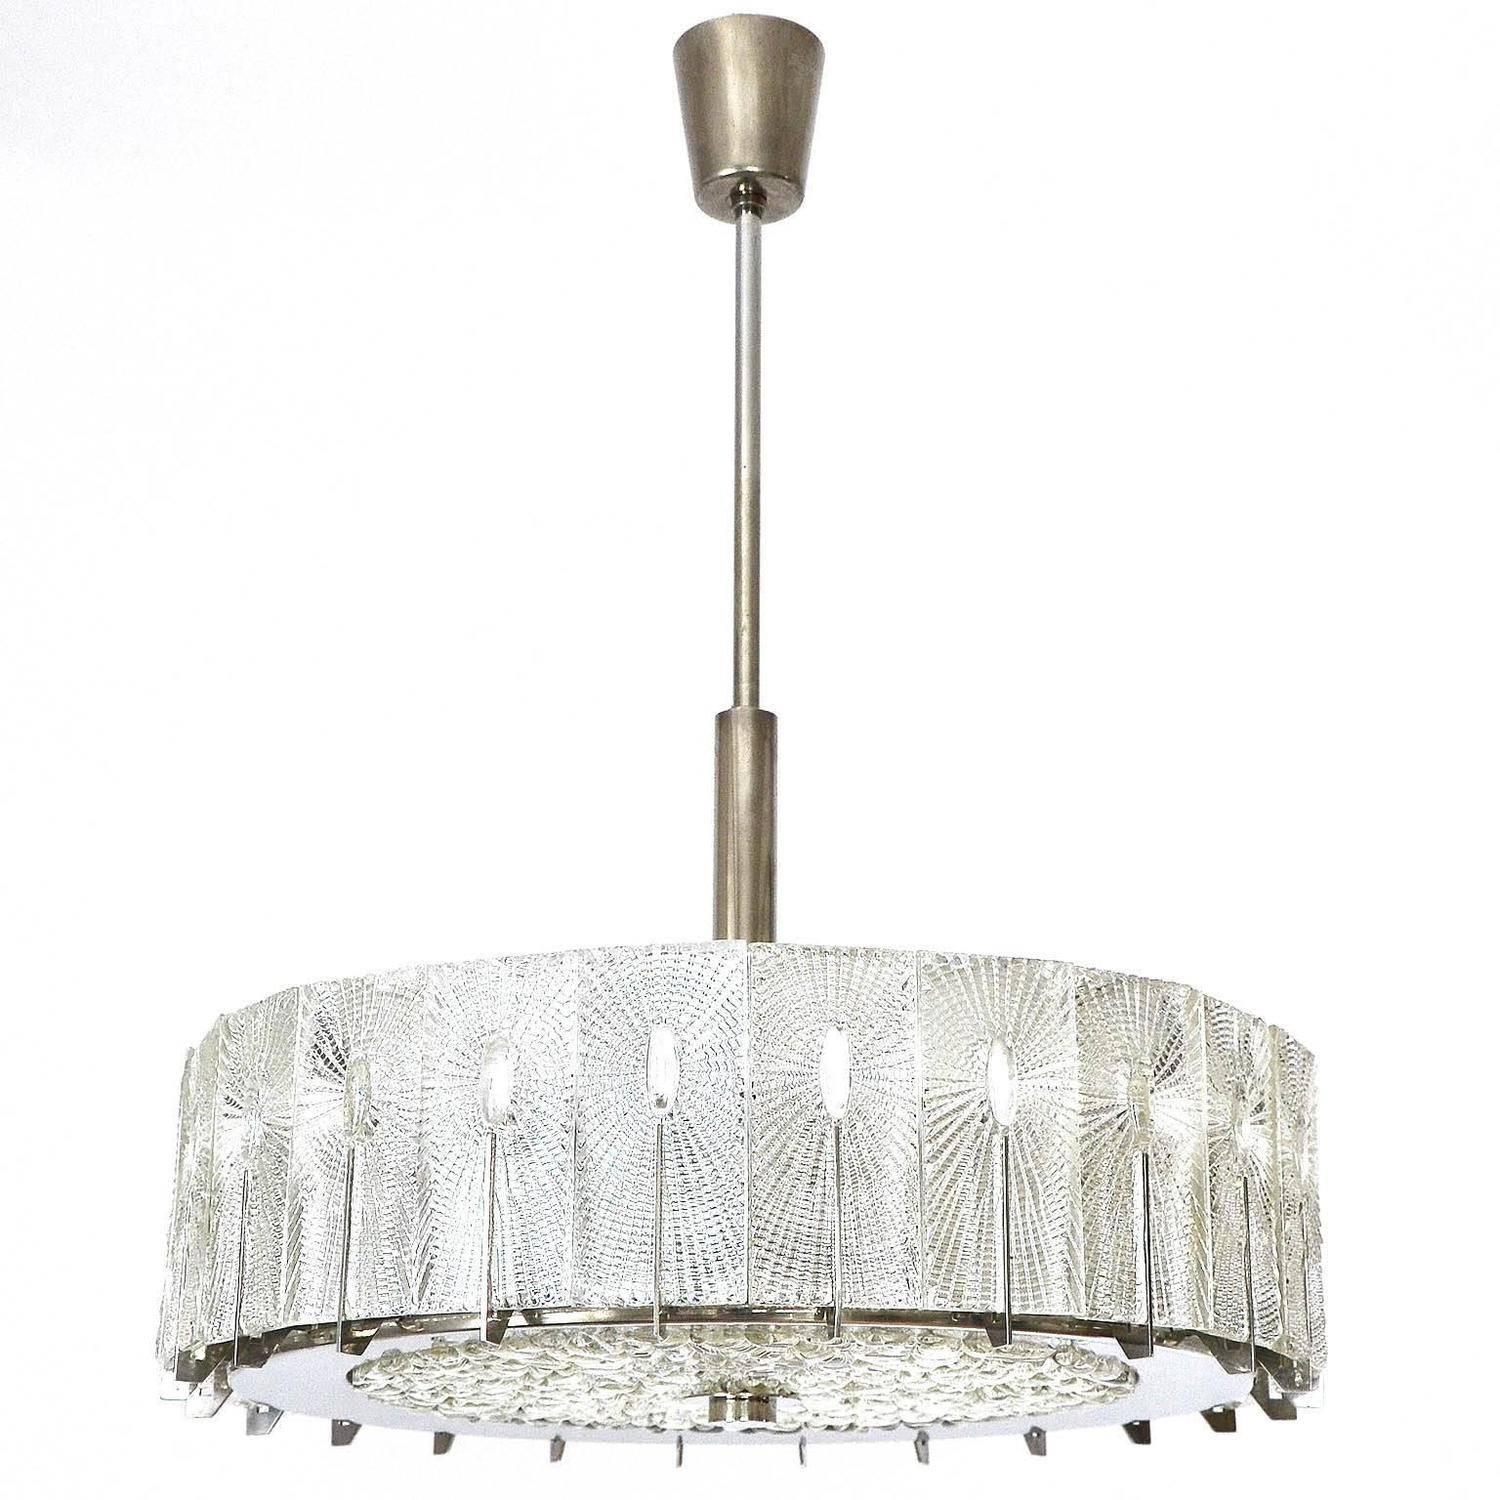 A beautiful textured glass and nickel (similar to chrome) light fixture by Rupert Nikoll, Austria, manufactured in midcentury, circa 1960 (late 1950s or early 1960s). The light and the glass is very similar to the lights from J.T. Kalmar.
The